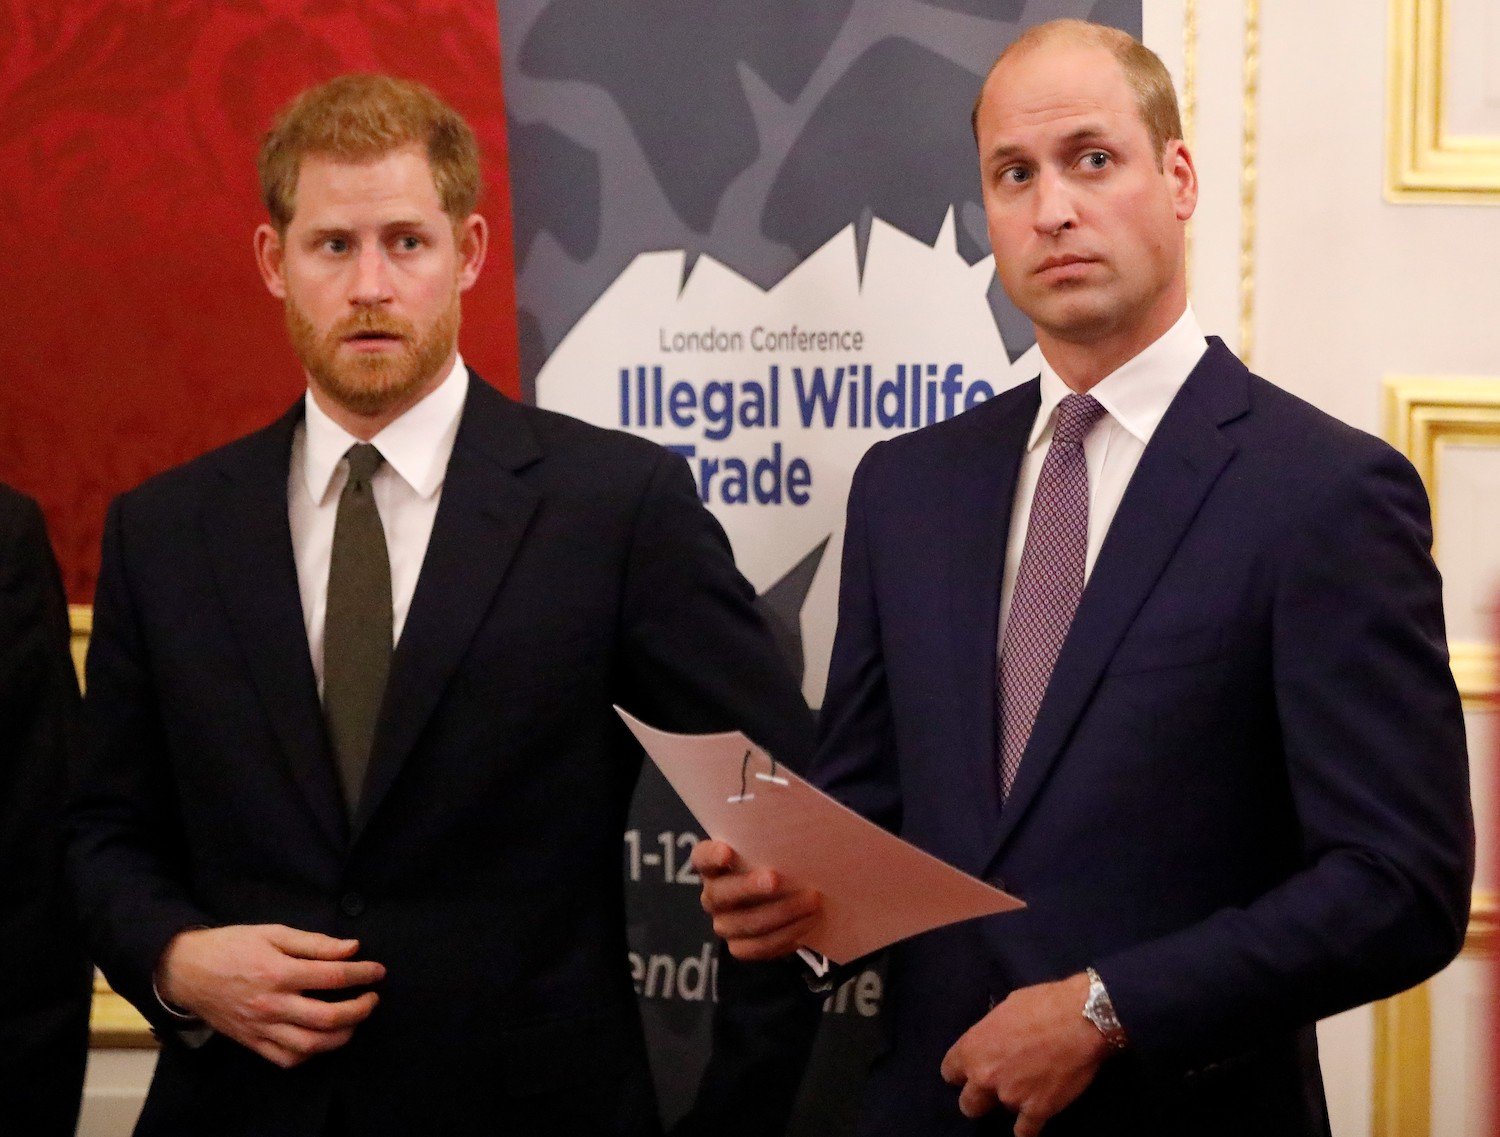 Prince William and Prince Harry host a reception to officially open the 2018 Illegal Wildlife Trade Conference at St James' Palace in London on October 10, 2018